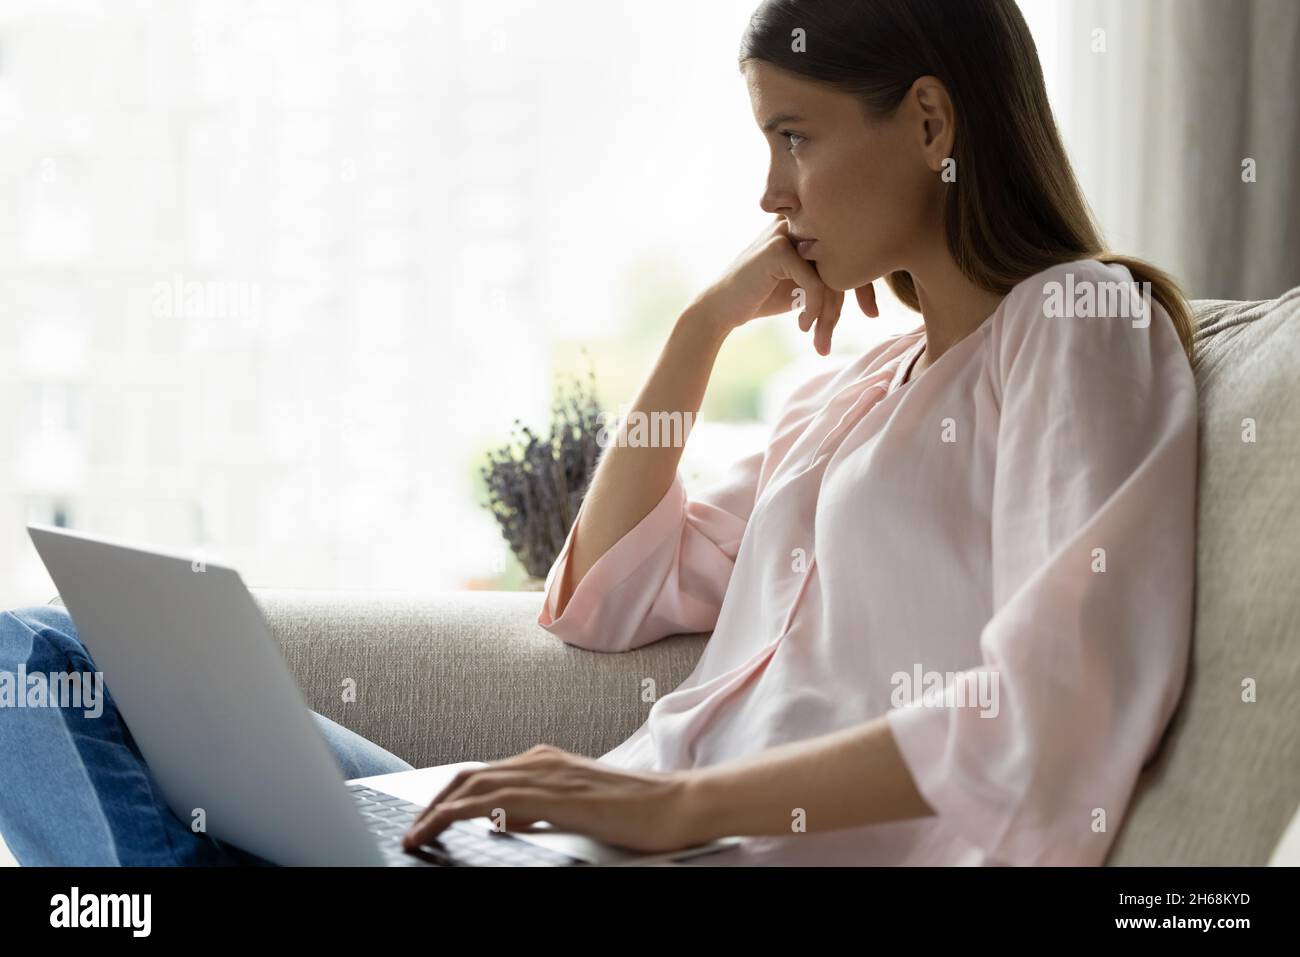 Pensive young woman thinking on problem solution, working on computer. Stock Photo